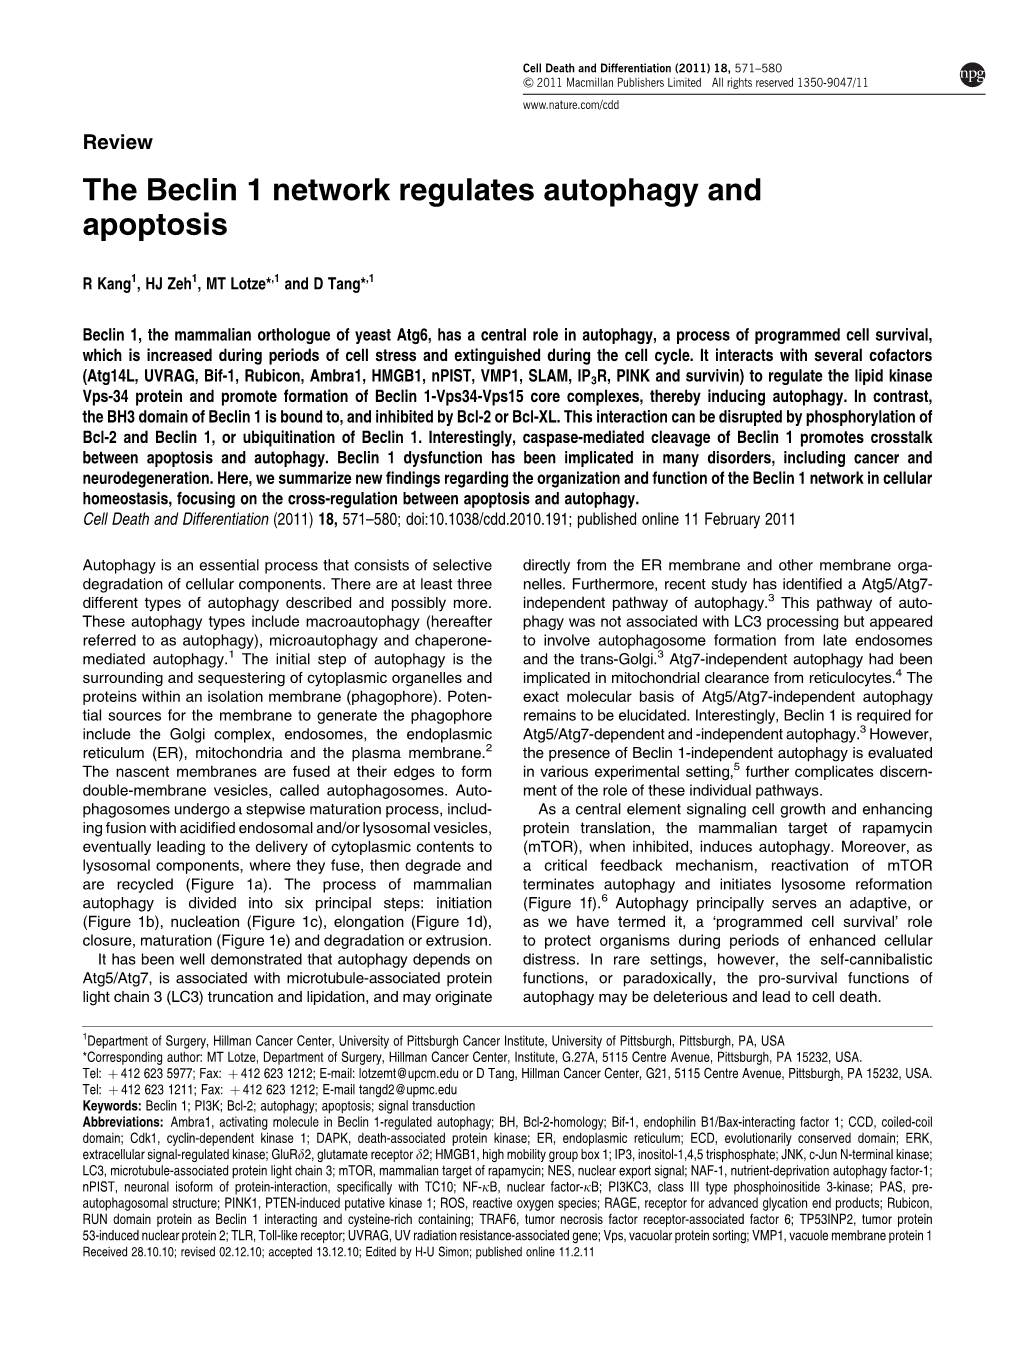 The Beclin 1 Network Regulates Autophagy and Apoptosis